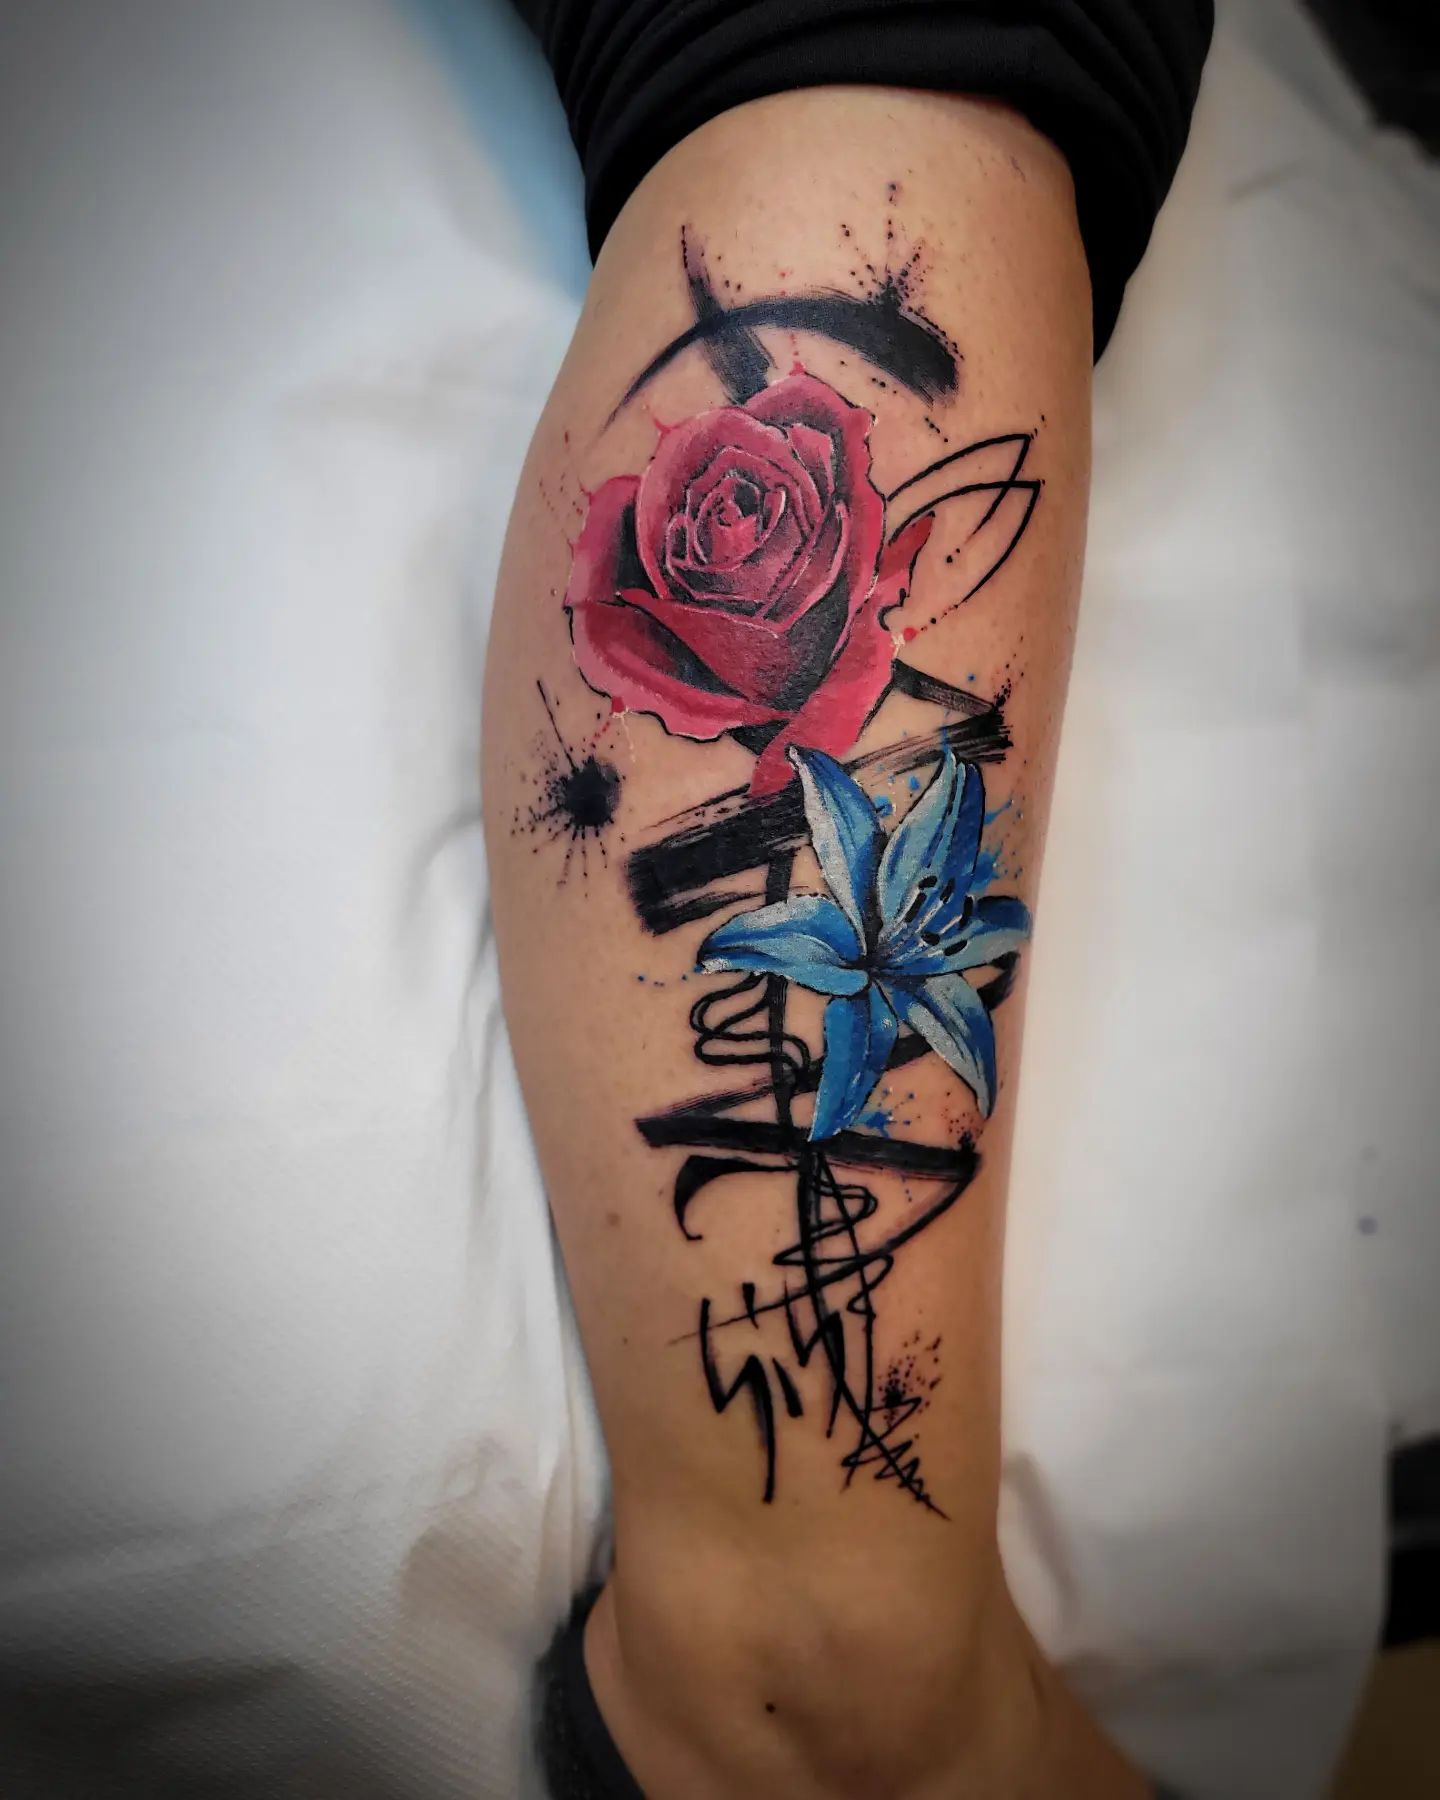 Red rose and blue lily tattoo is a symbol of love. It means that the one you love loves you back. It can also mean that your love for someone is unconditional and true. Black splash behind makes them stand out, too.